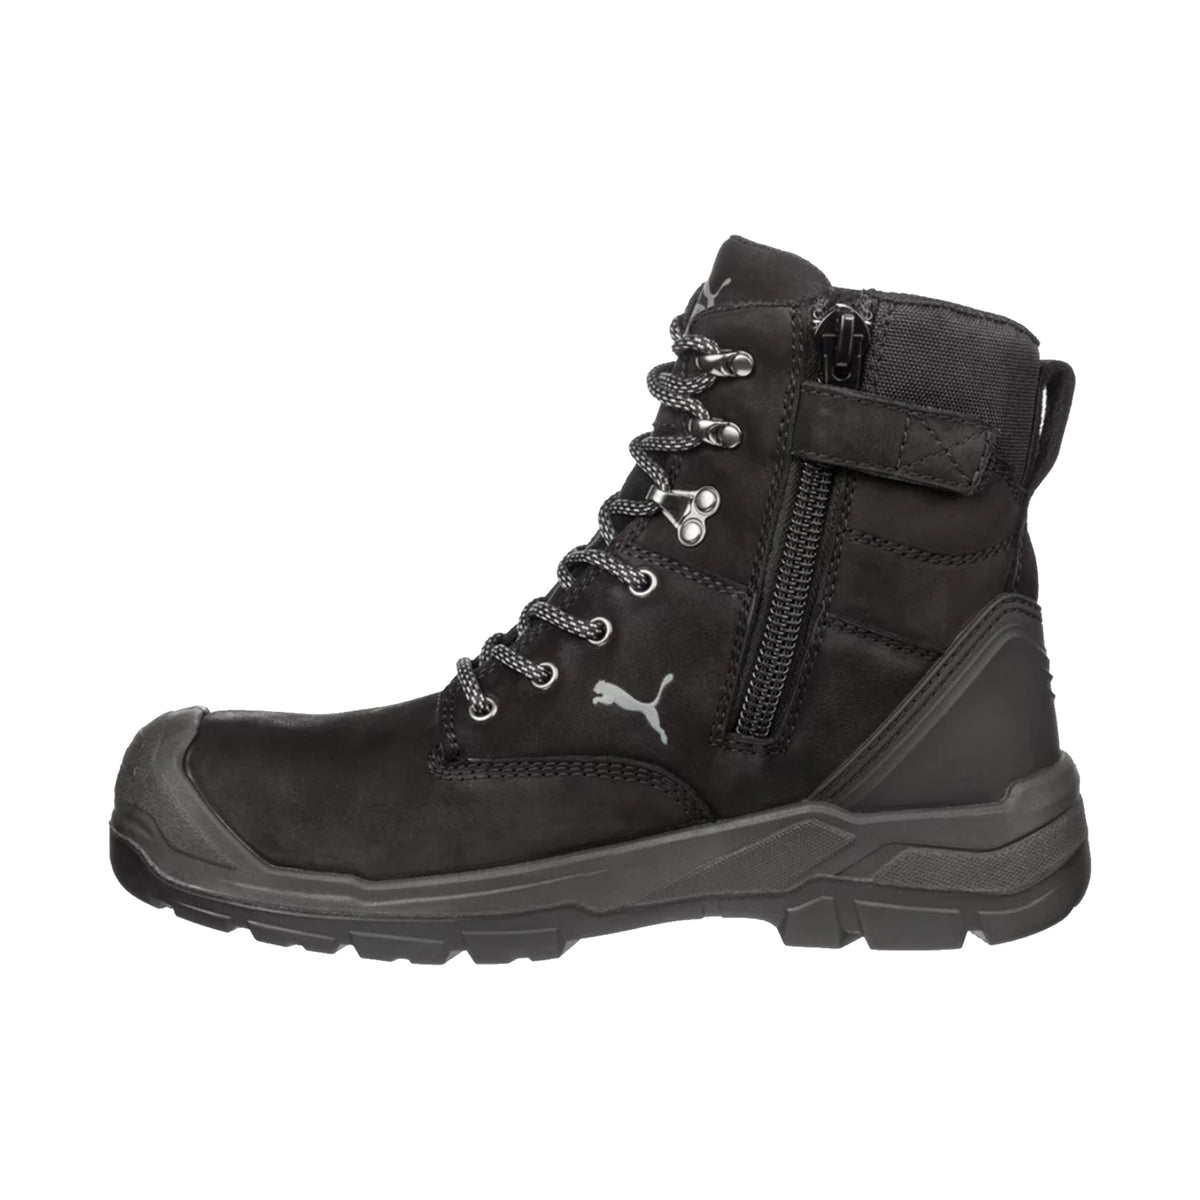 puma conquest safety boot in black